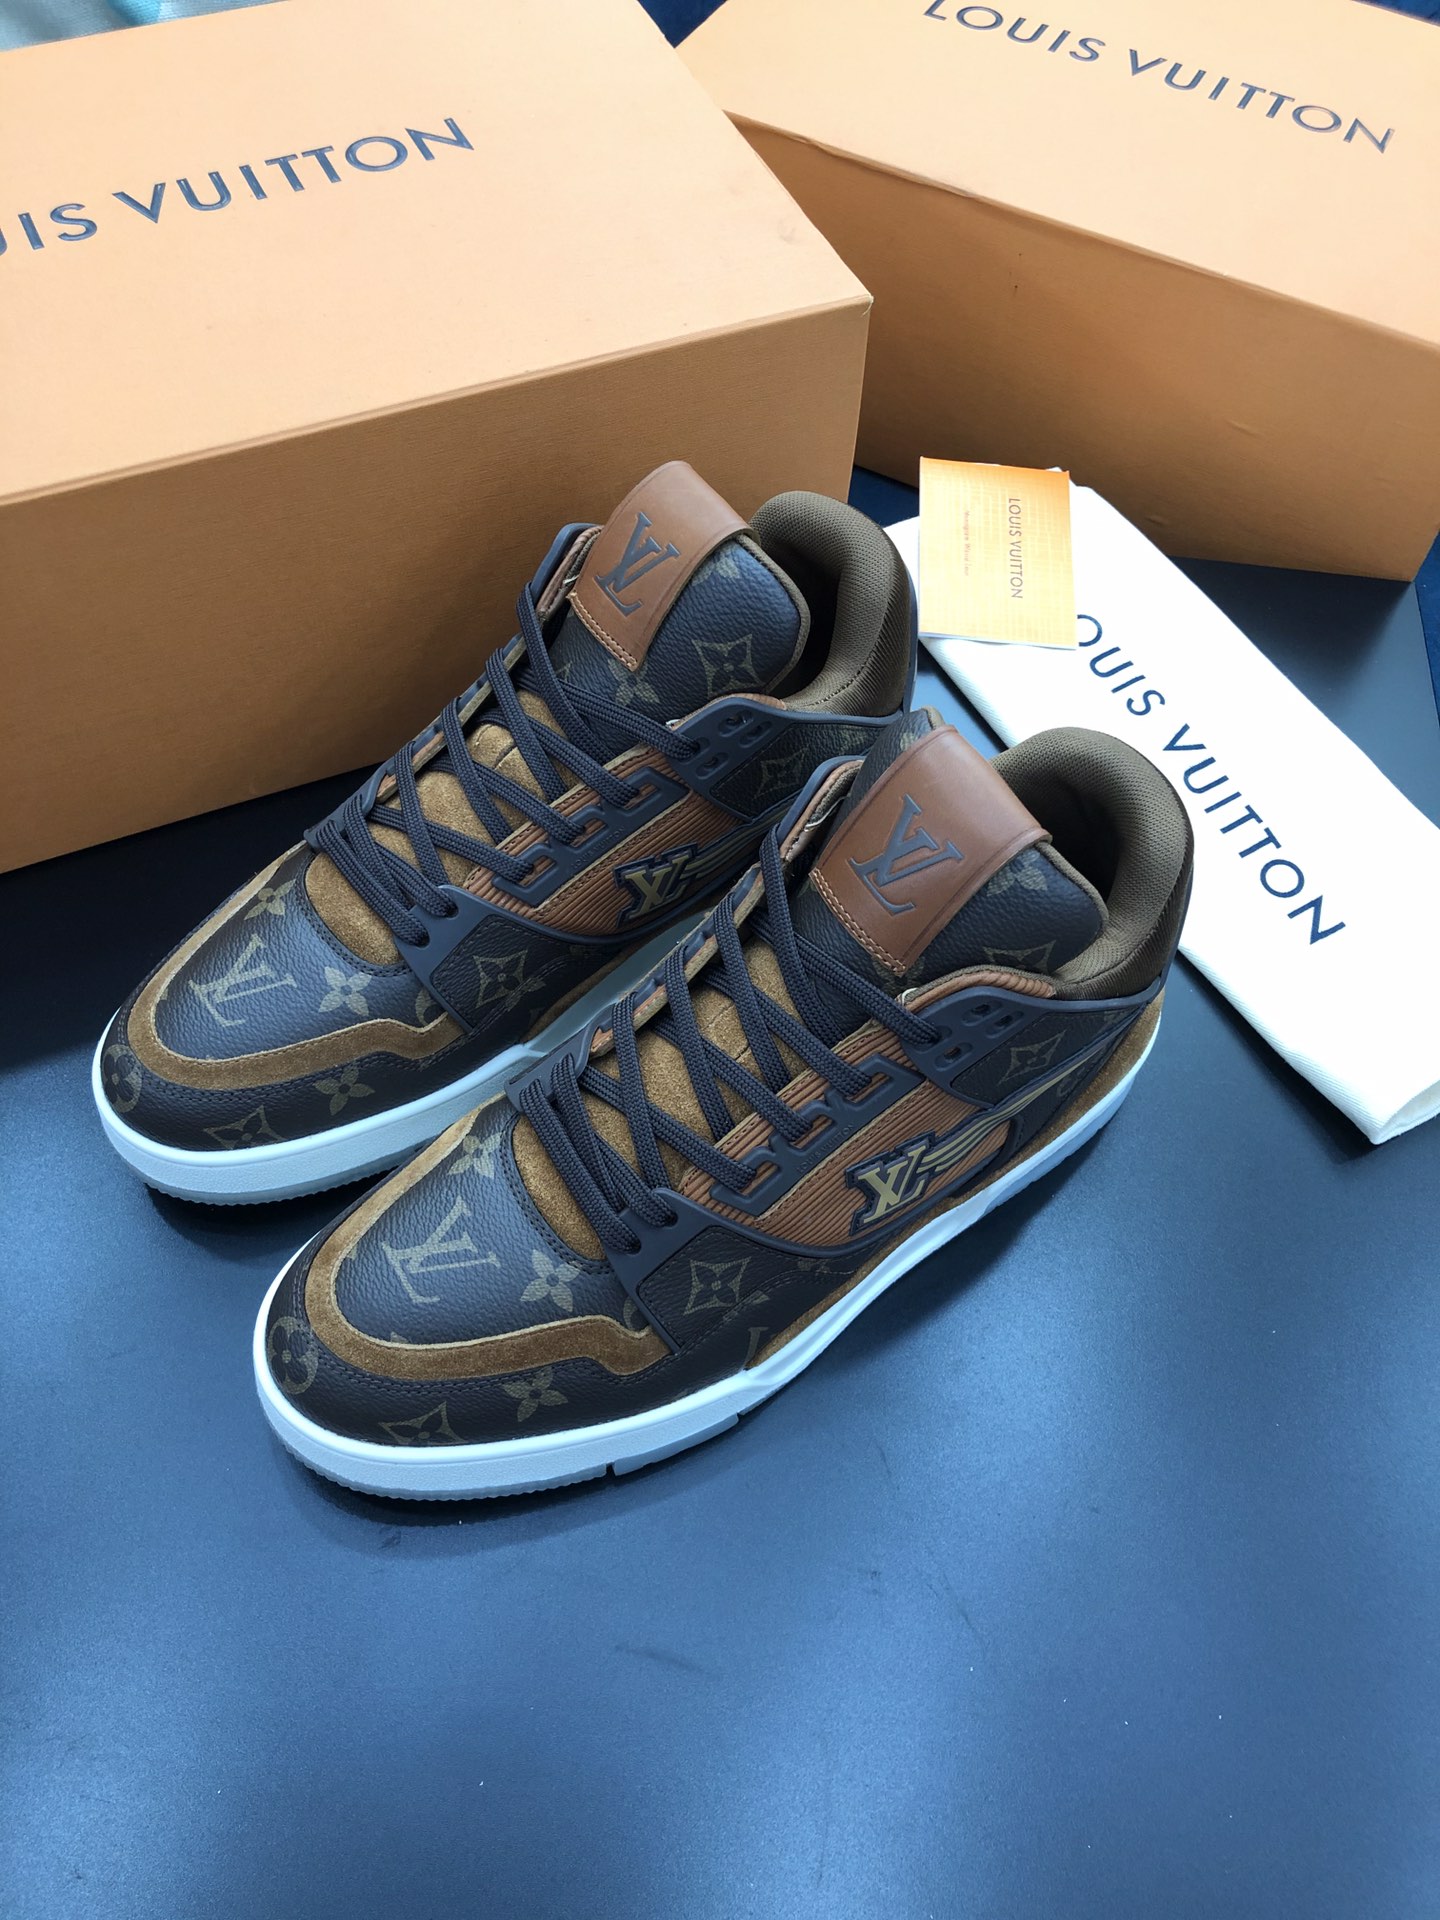 WTS] Louis Vuitton Trainer LV 10 (US 12-13) USED $675 : r/sneakermarket